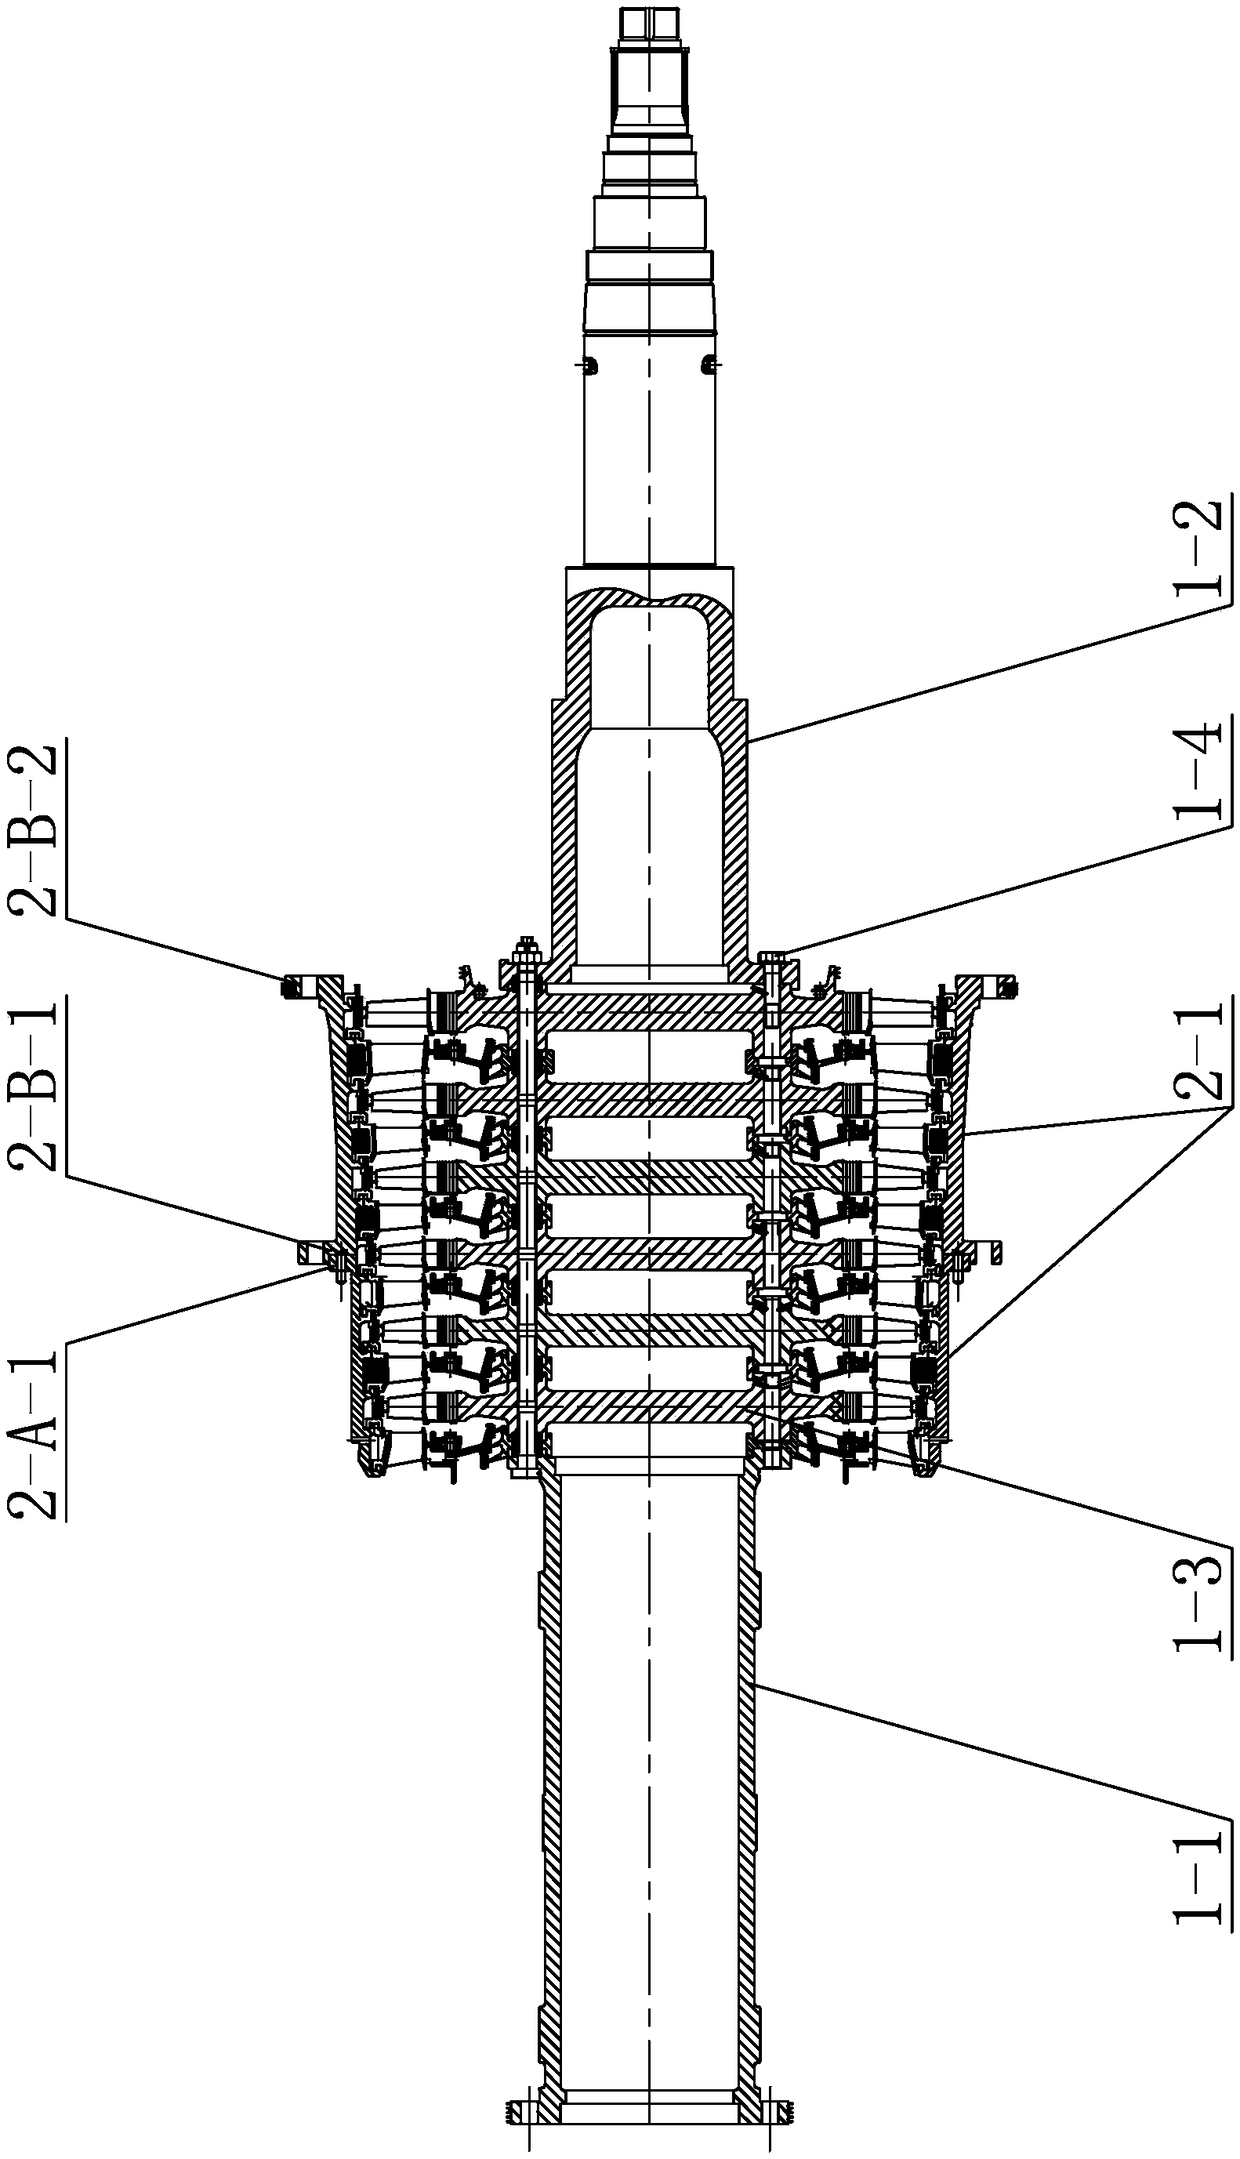 Connection structure capable of realizing rapid disassembly and assembly, and used for helium gas turbine